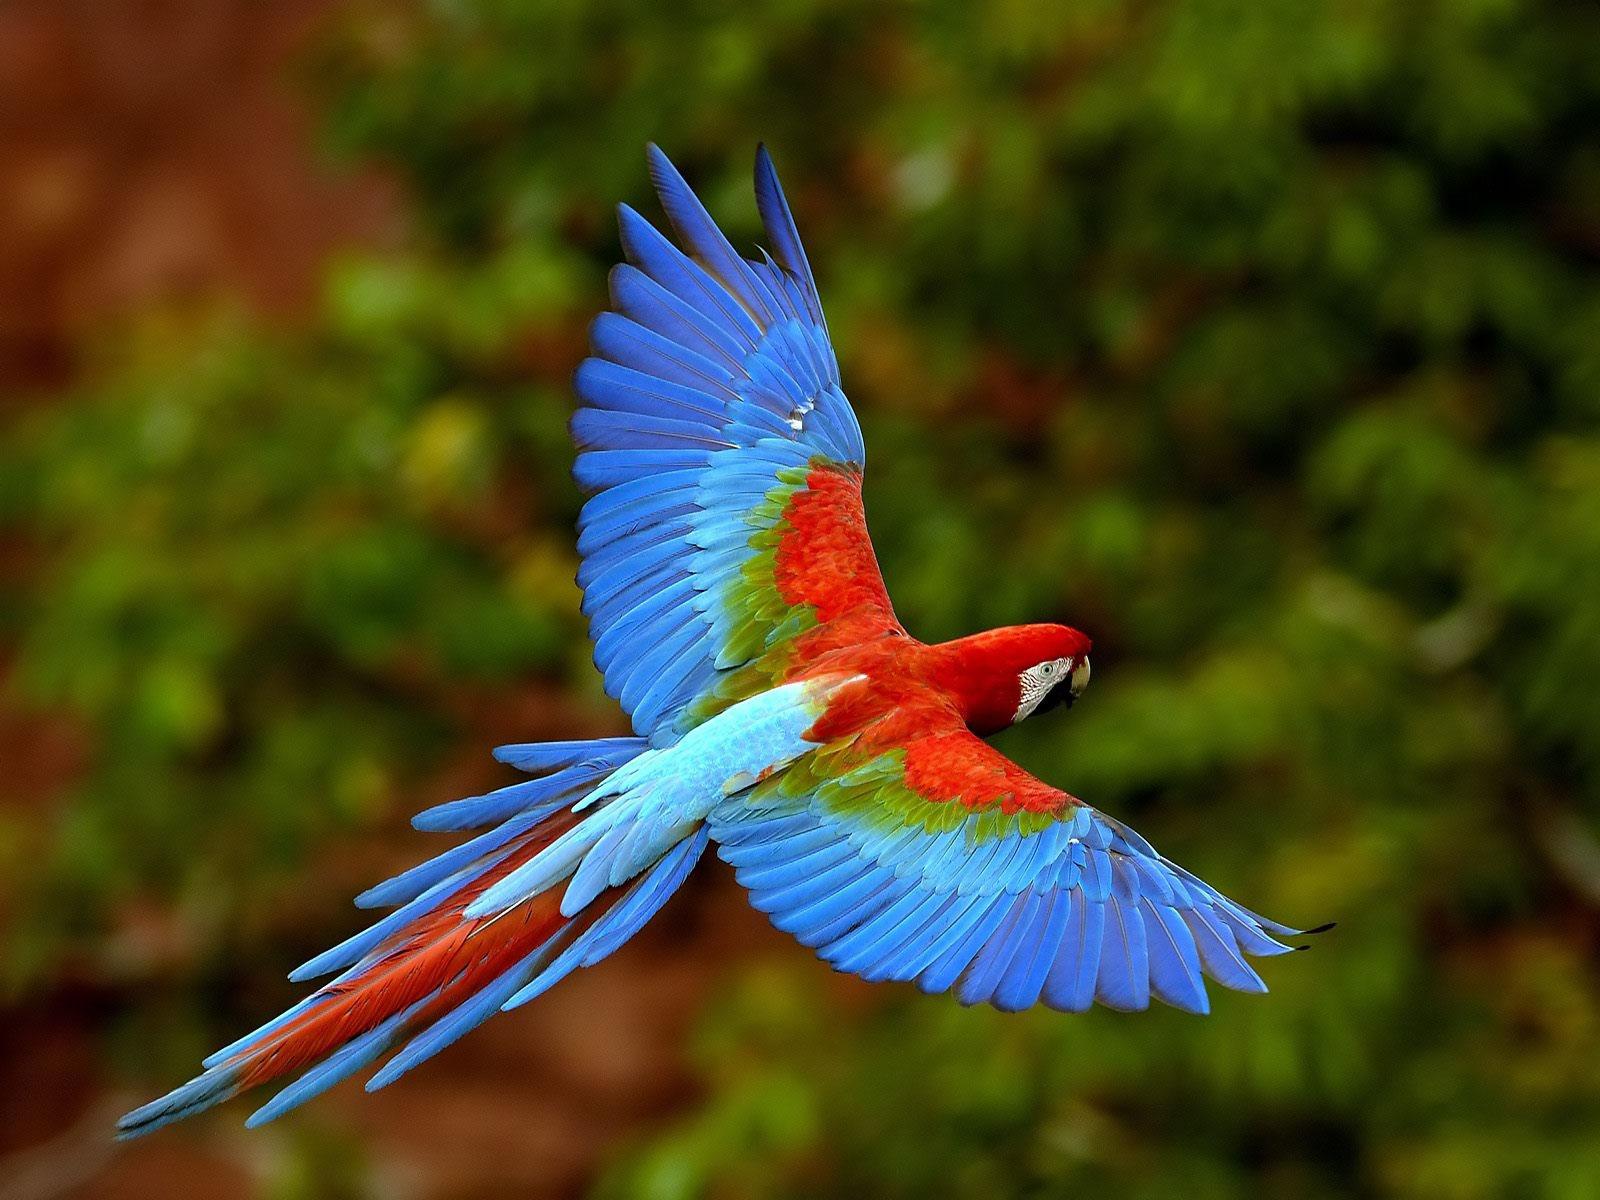 Wildlife of the World: Beautiful Parrot Wallpaper 2012